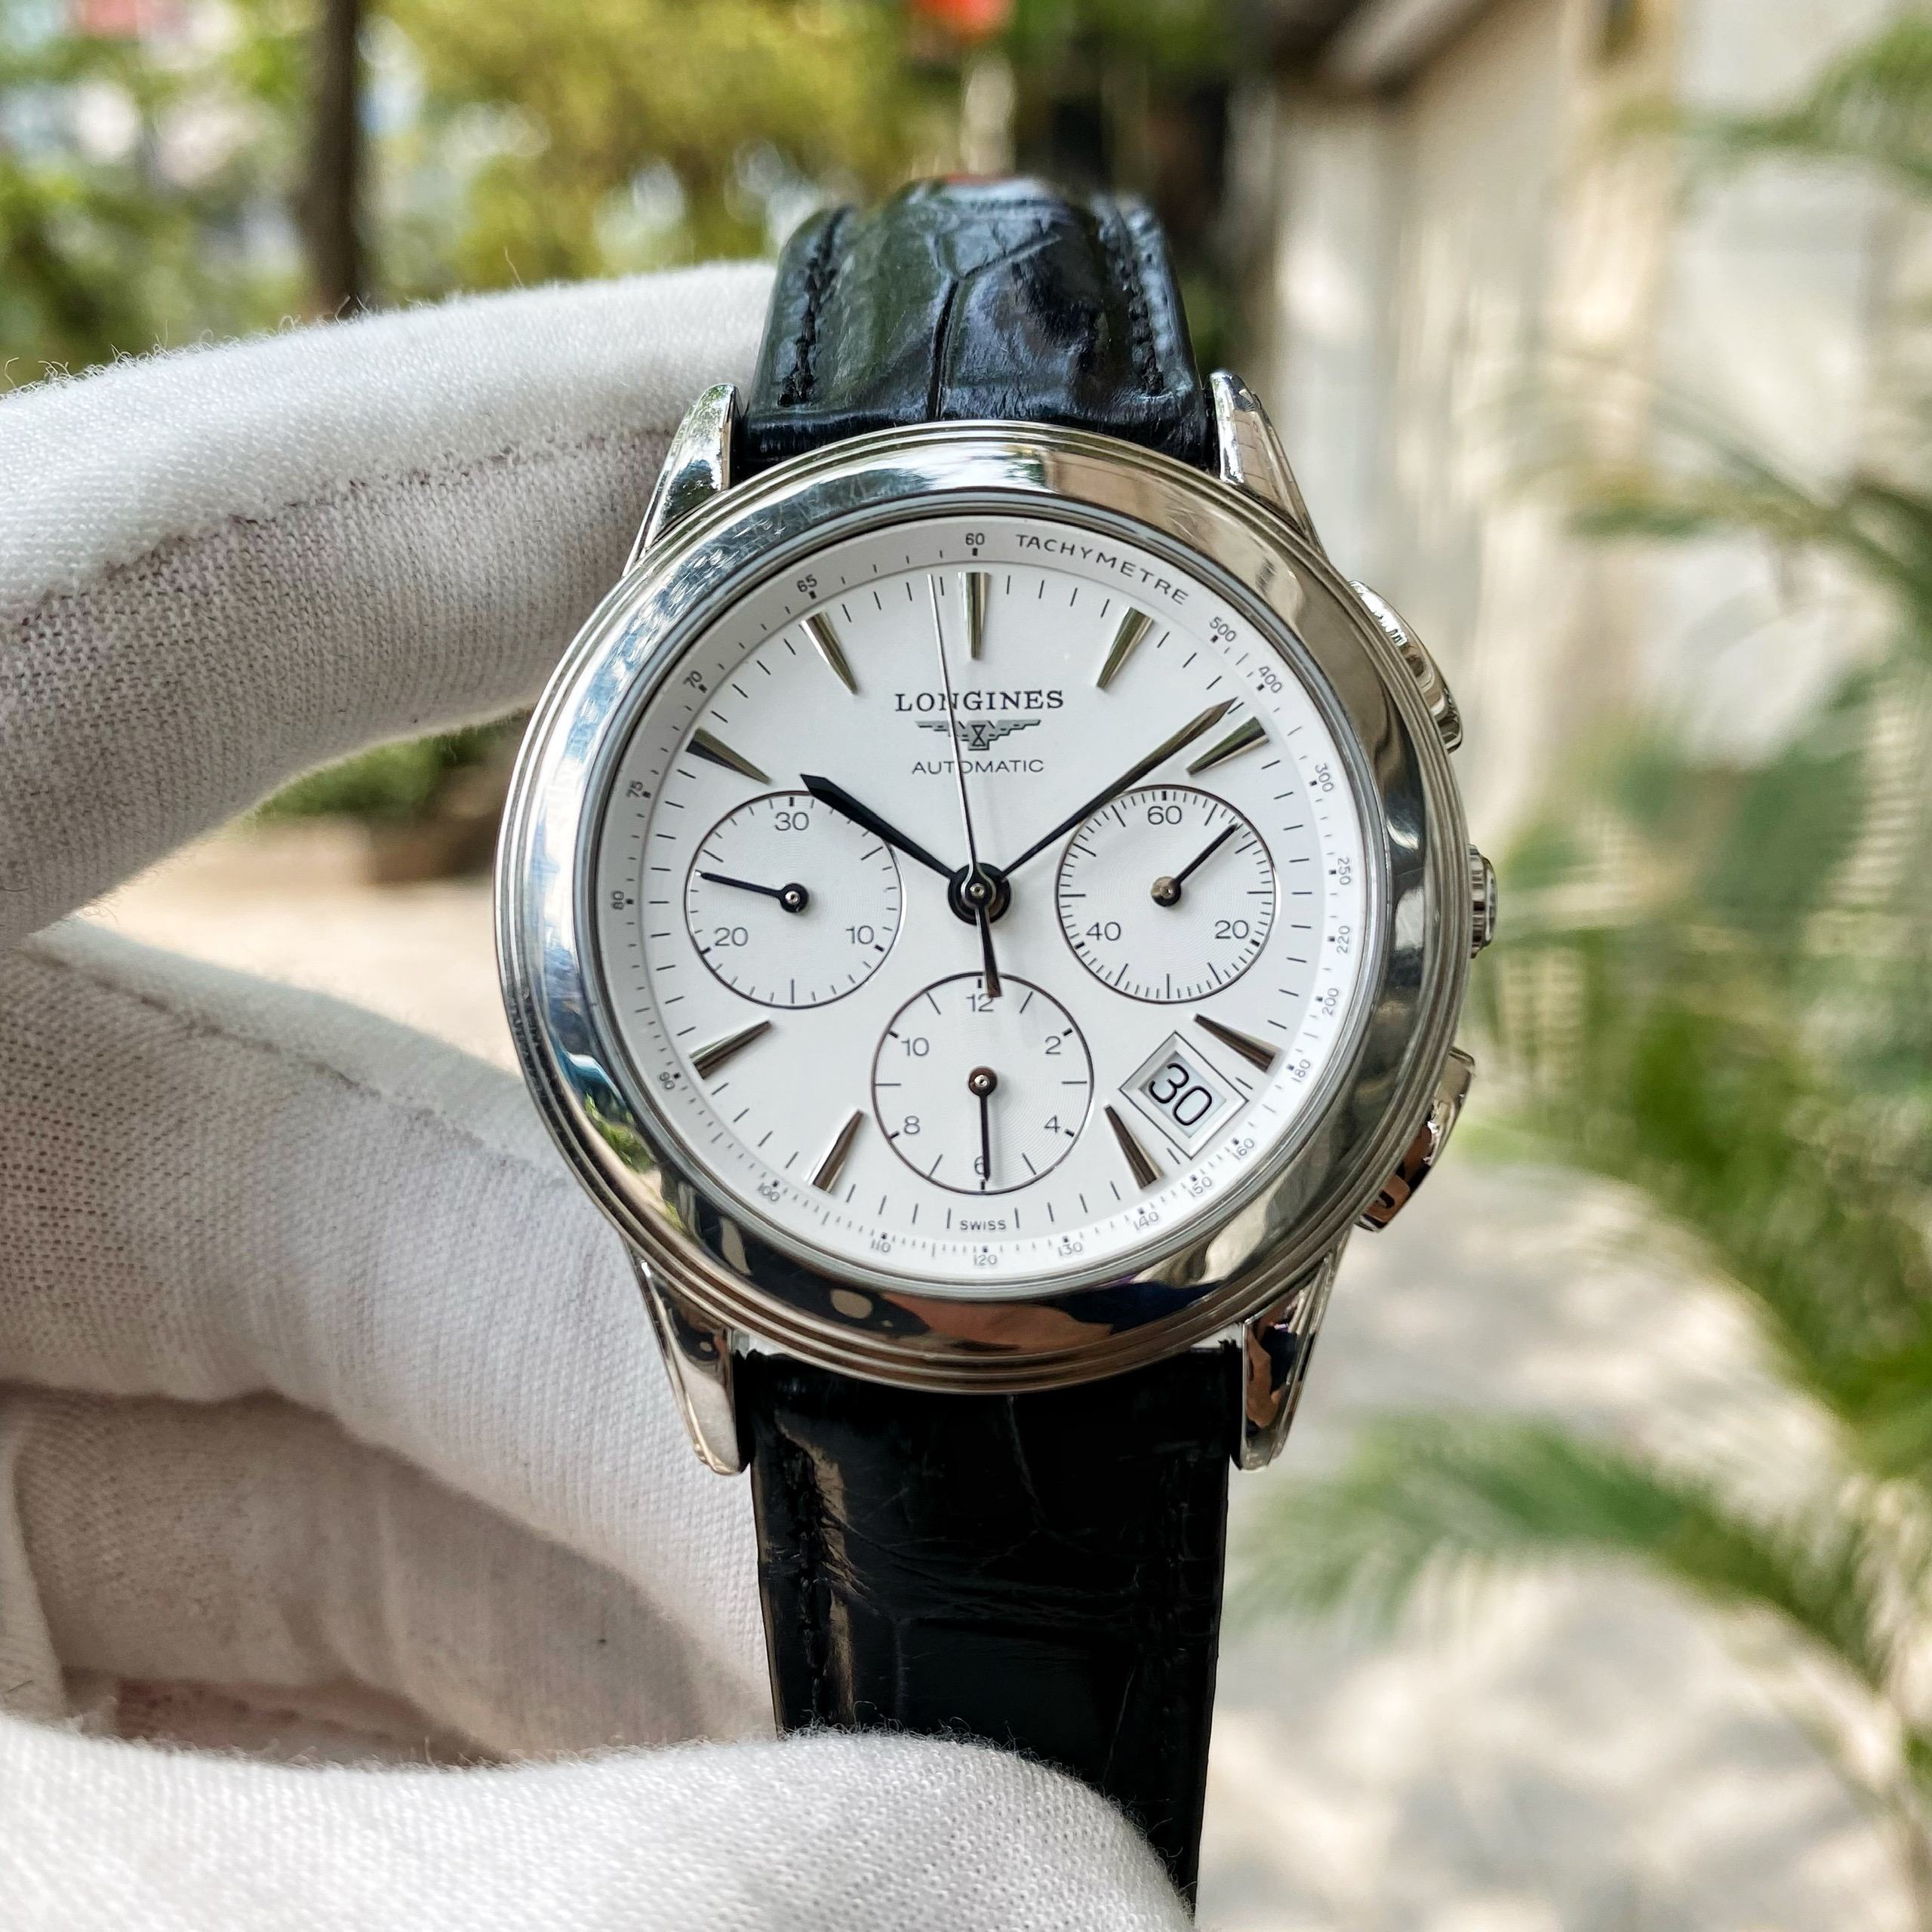 Đồng Hồ Longines Flagship Chronograph Stainless Steel L4.718.4 - Cũ